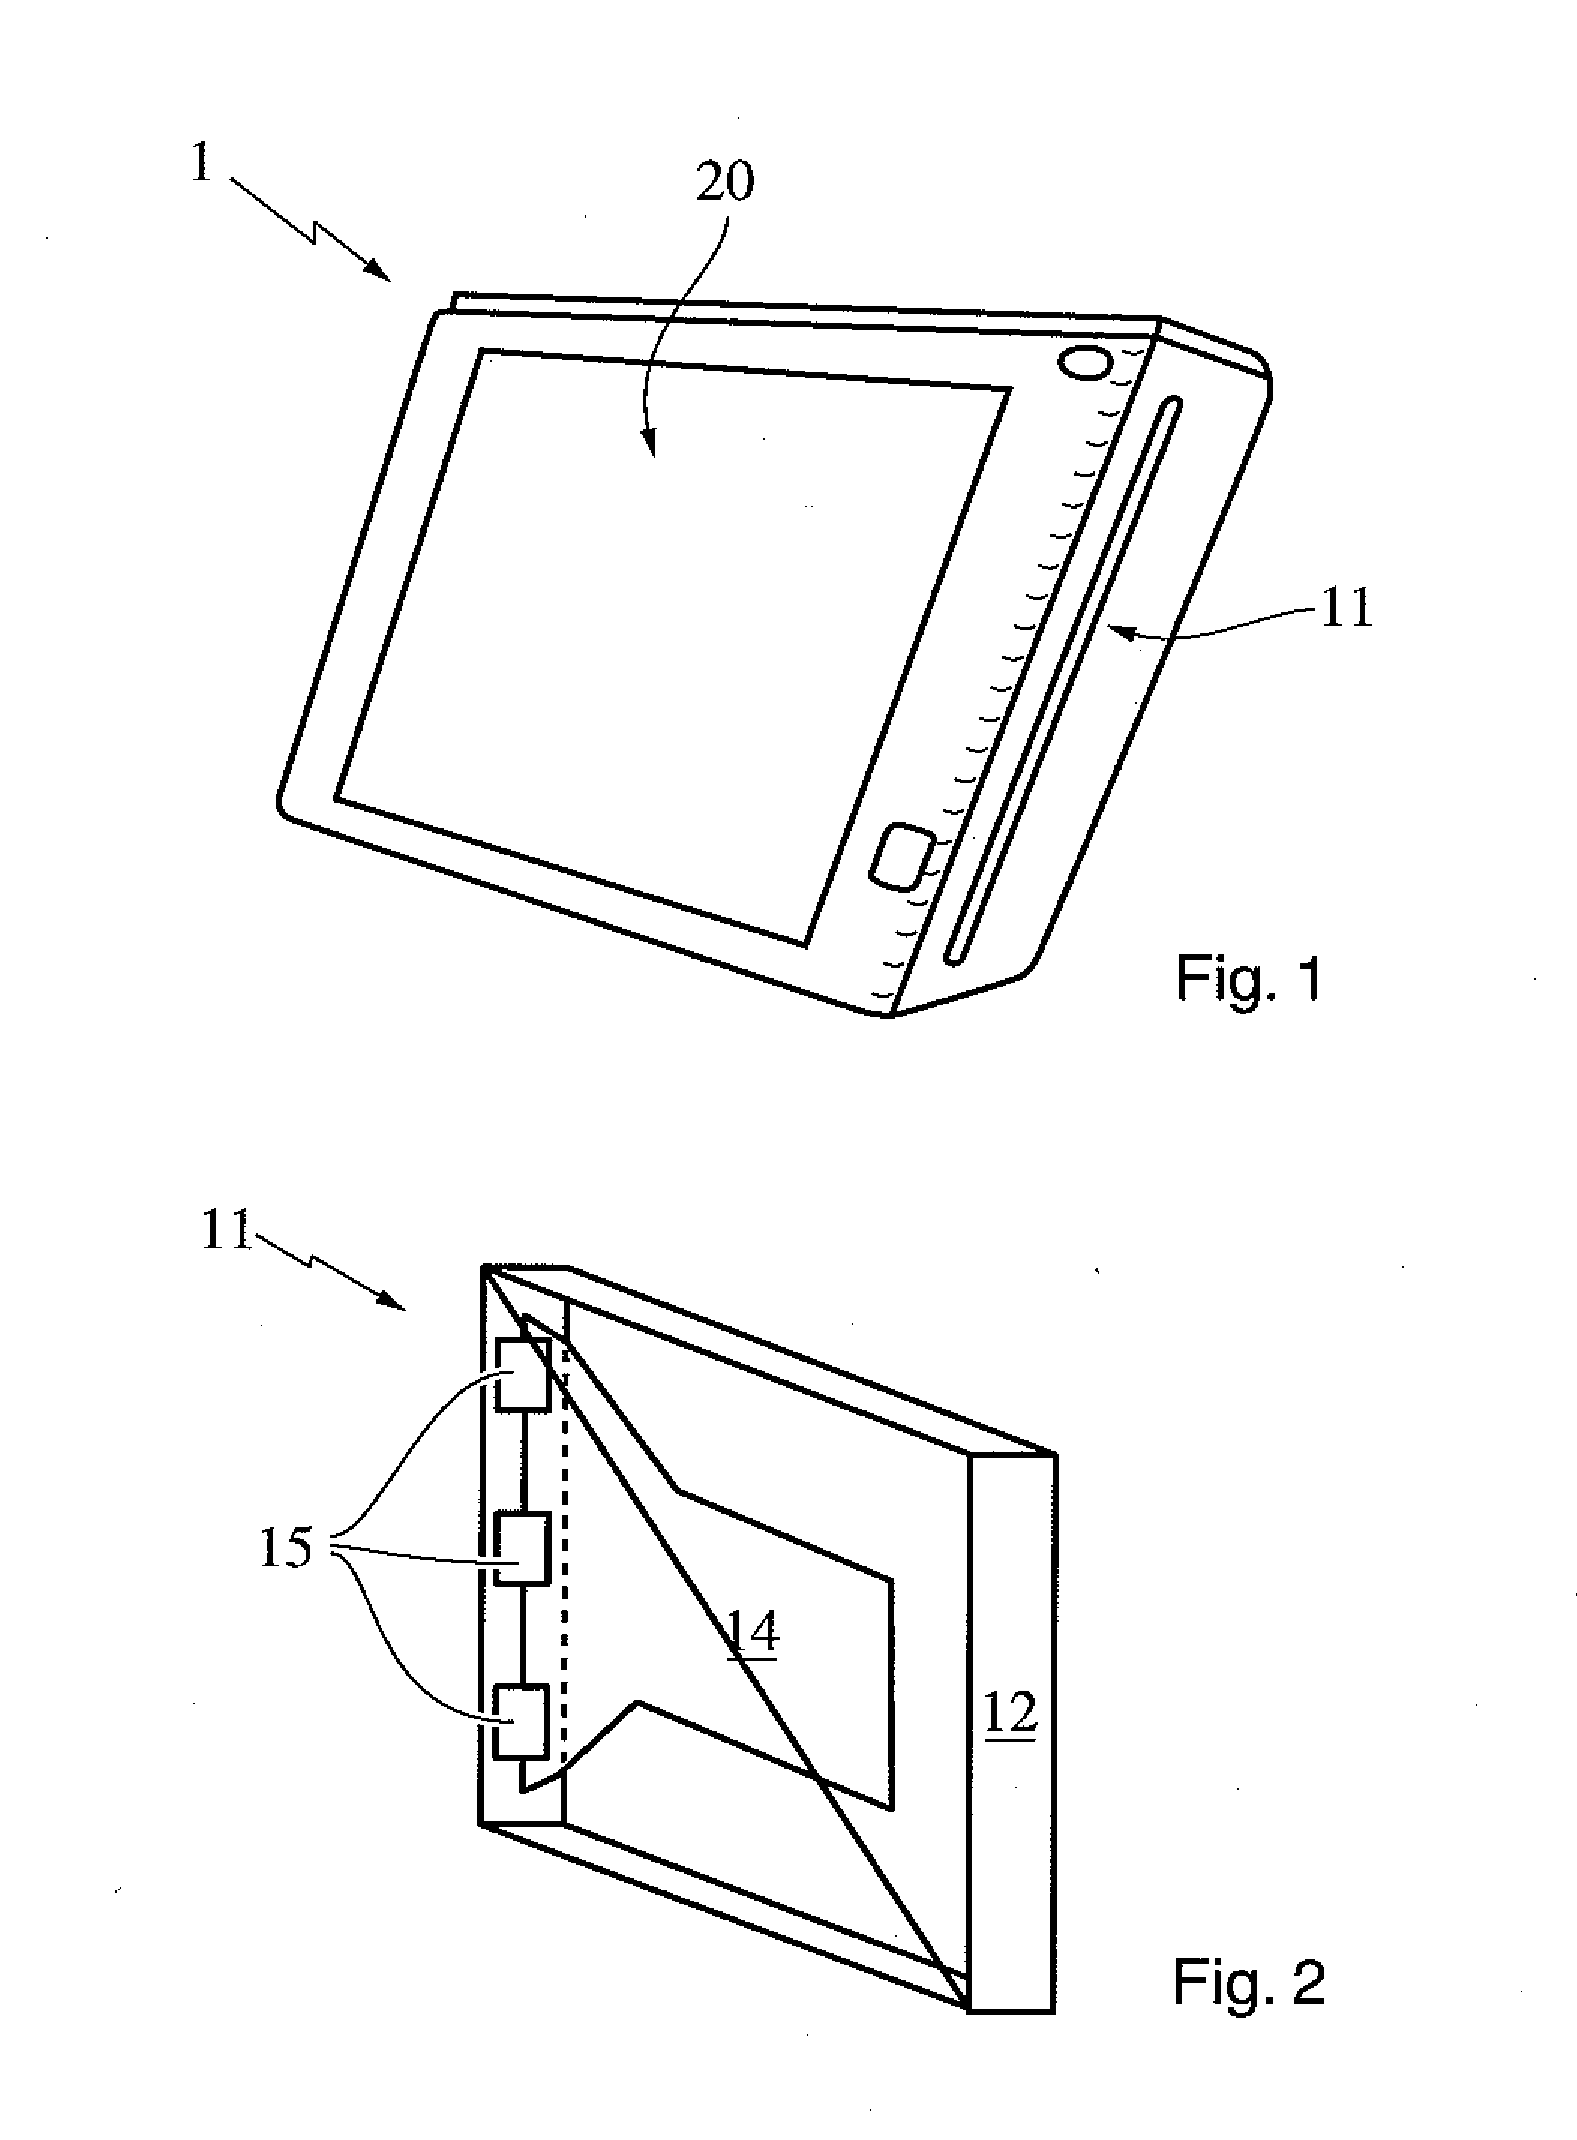 Display device and method for making same